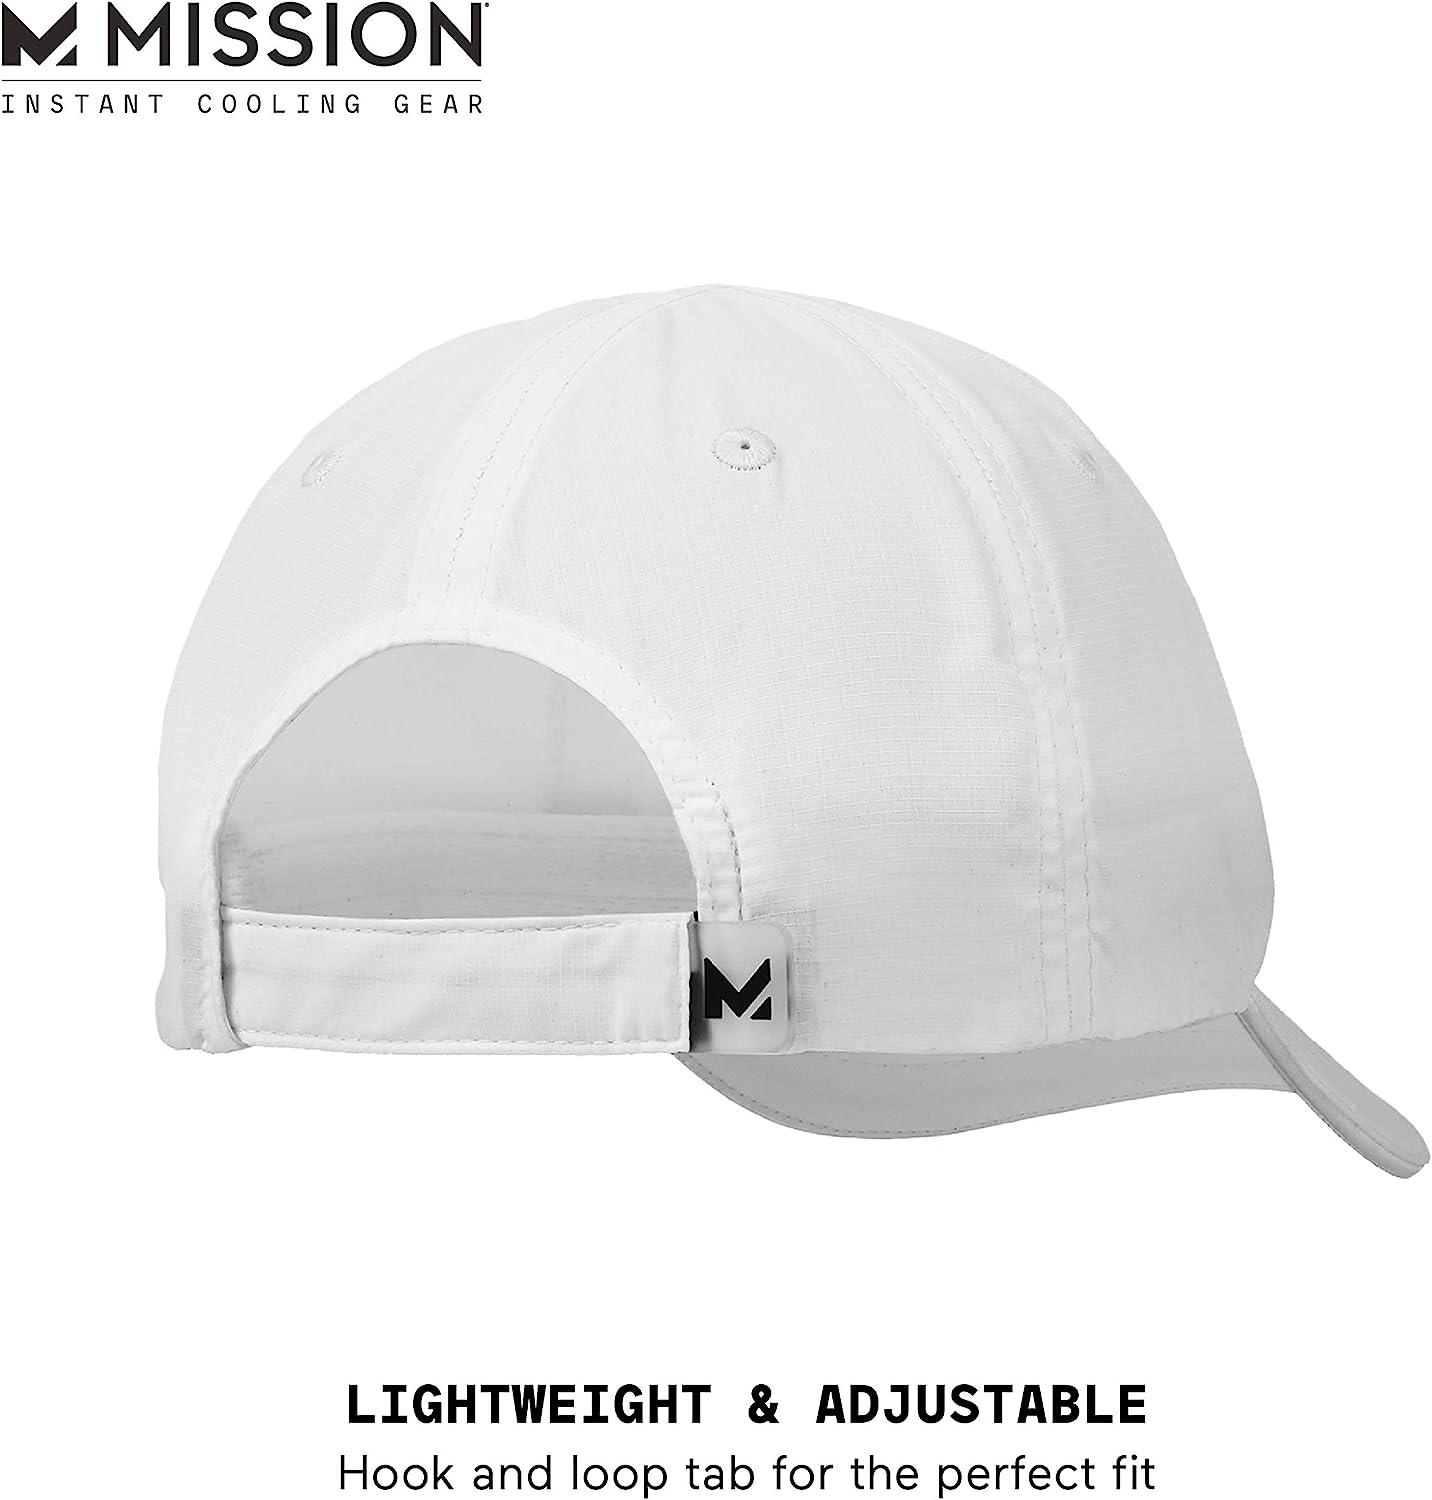 Mission Cooling Performance Hat